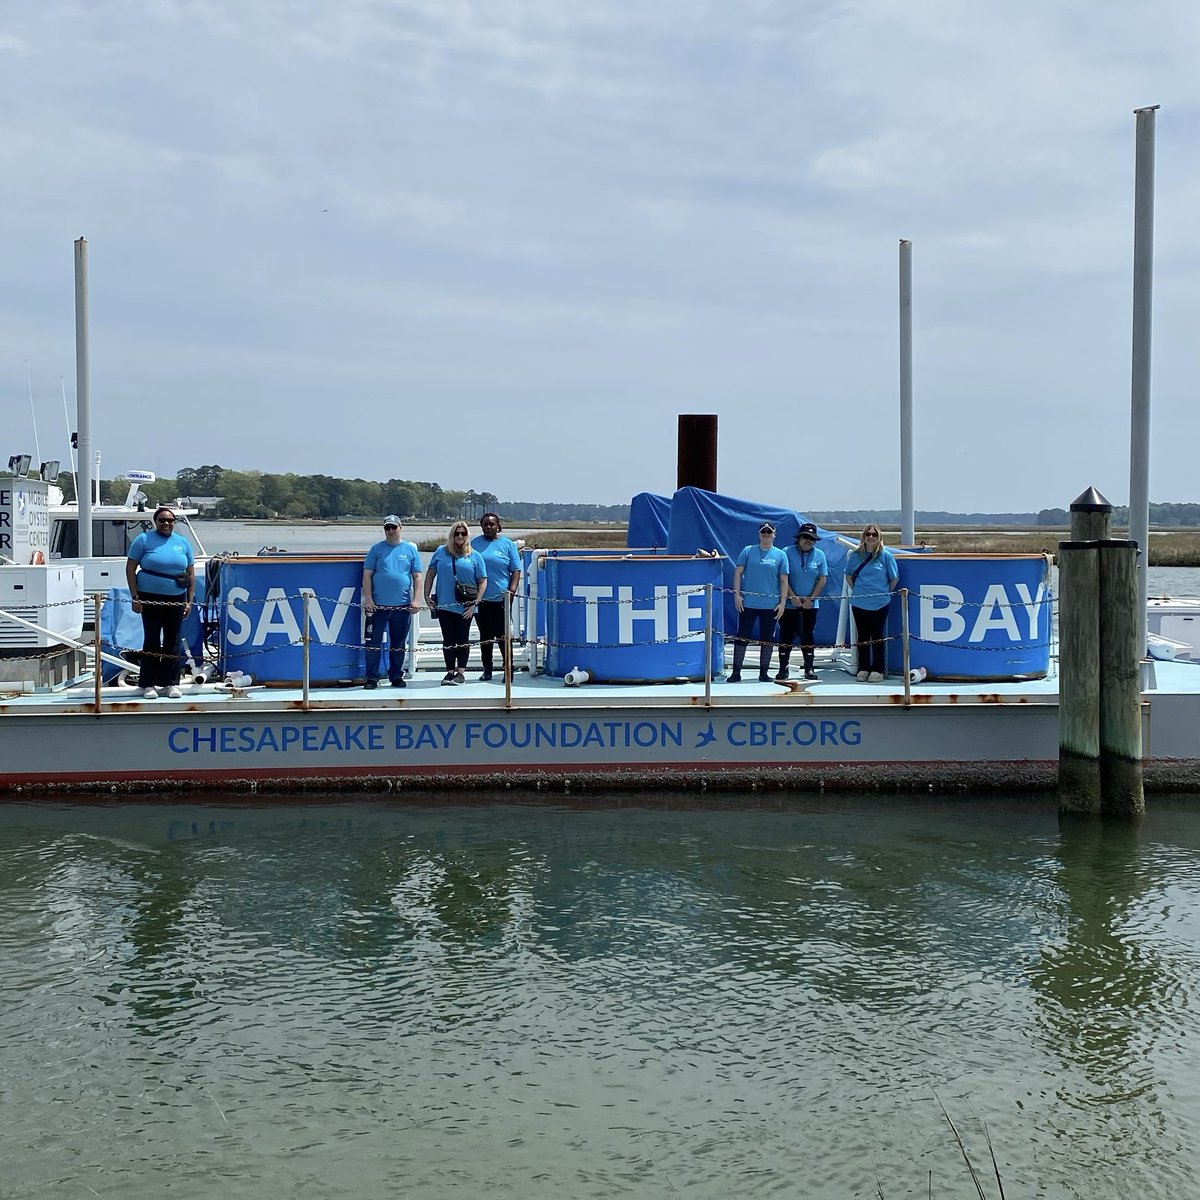 A team of PRA Group colleagues got out of the office to help the @chesapeakebay Foundation bag 36,000 recycled oyster shells, which will provide homes for 360,000 baby oysters. #PRAGroup #GlobalReach #LocalTouch #PRAImpact #SocialResponsibility